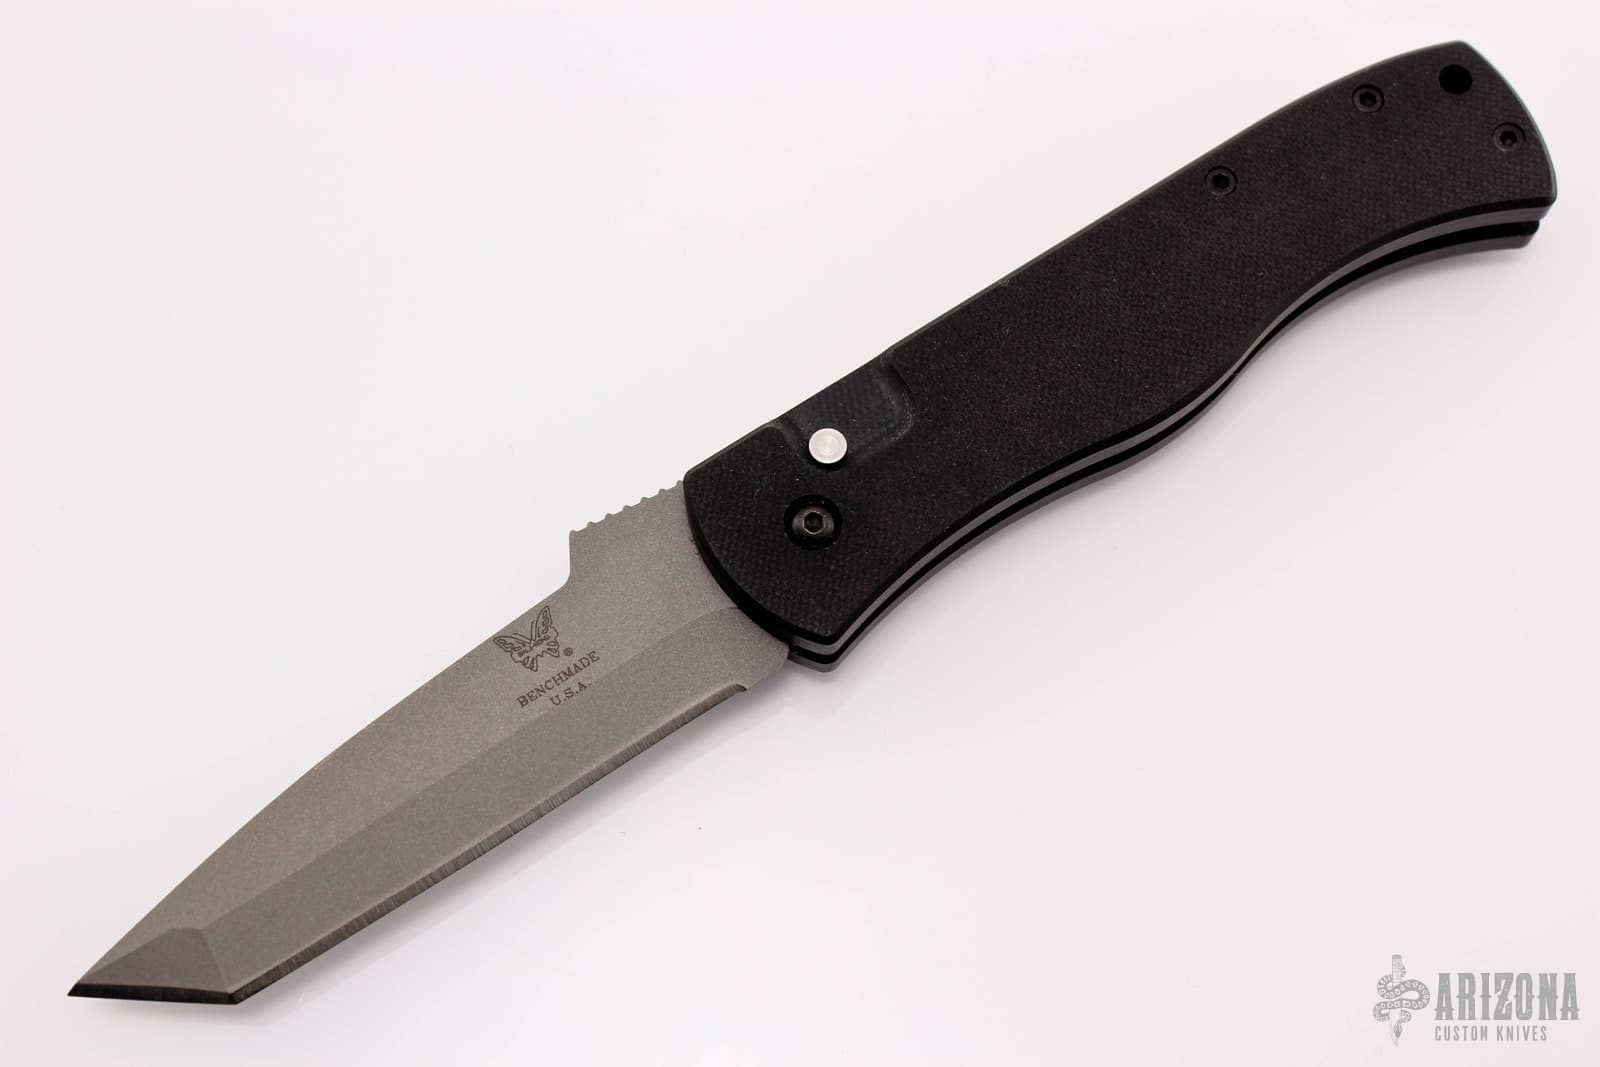 41 Best Benchmade emerson design ats 34 with remodeling ideas